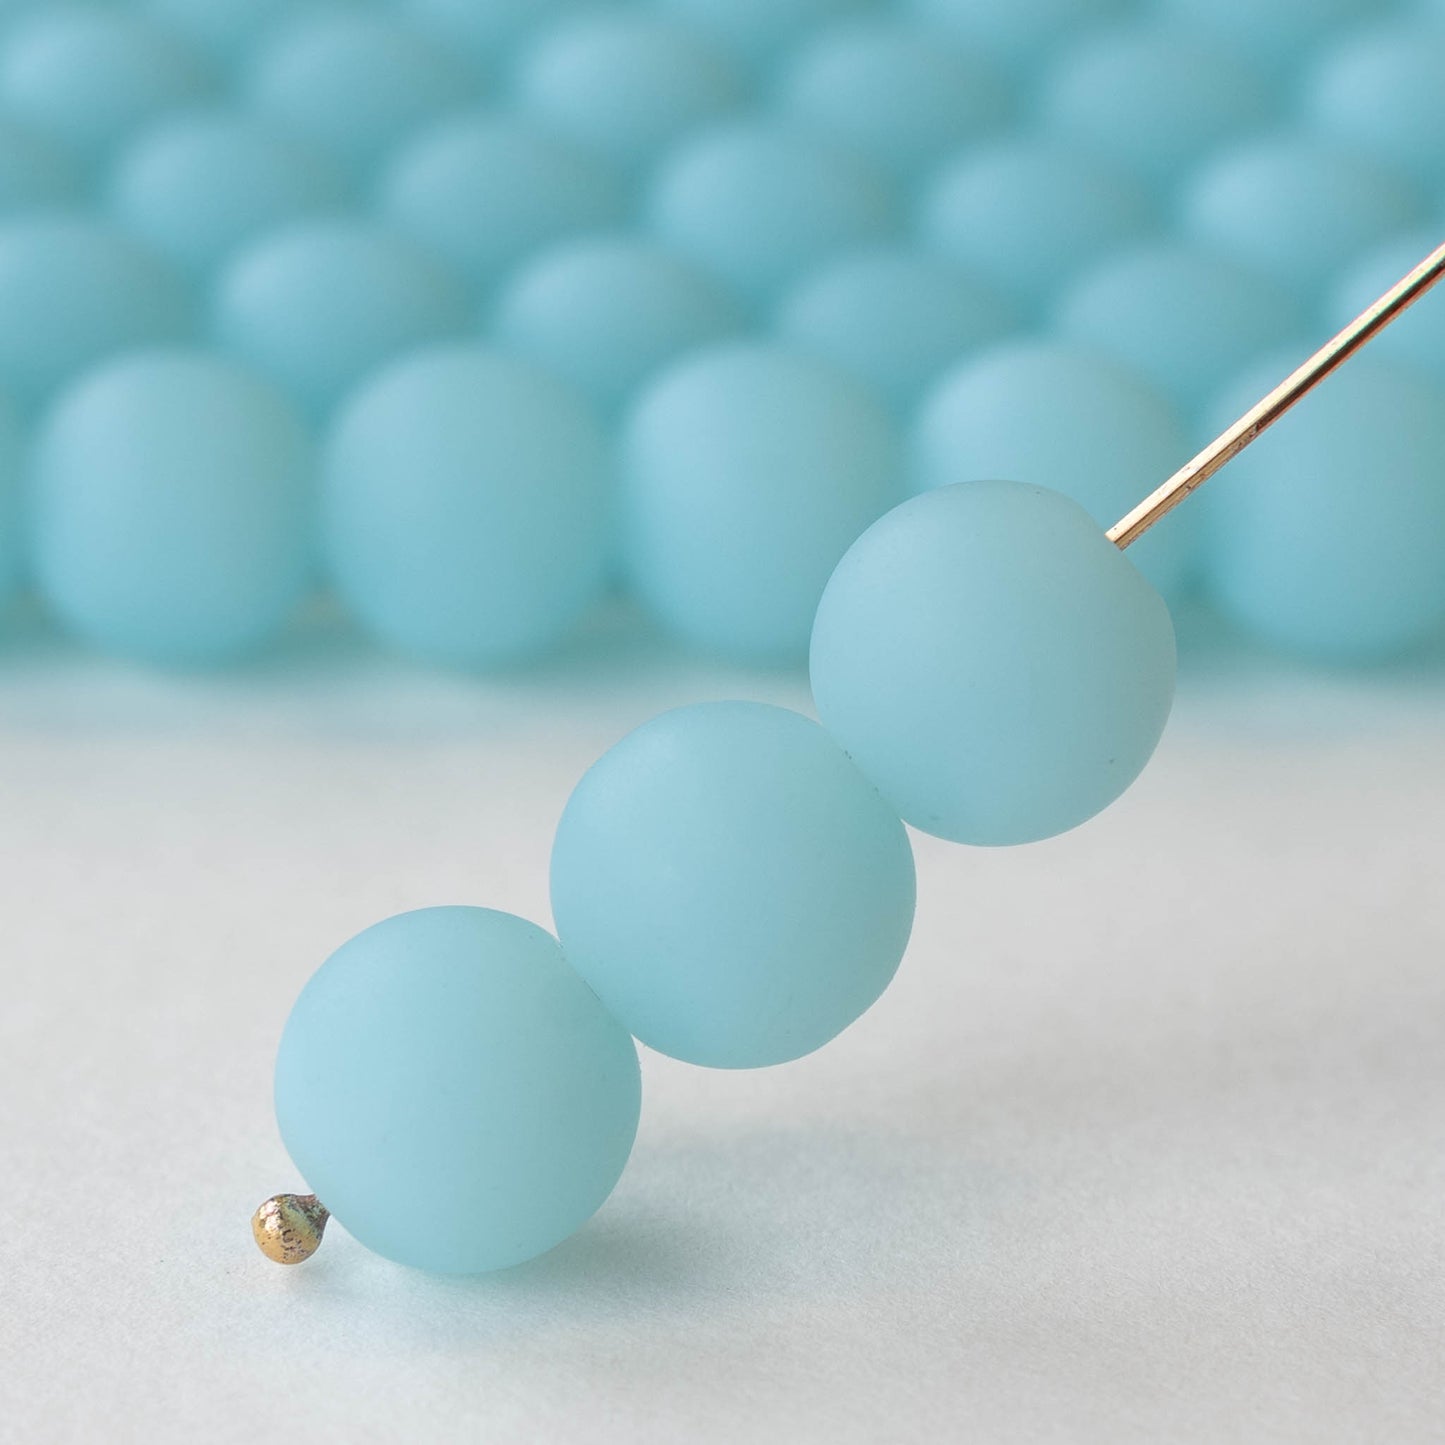 Load image into Gallery viewer, 10mm Frosted Glass Rounds - Opaque Aqua - 21 beads
